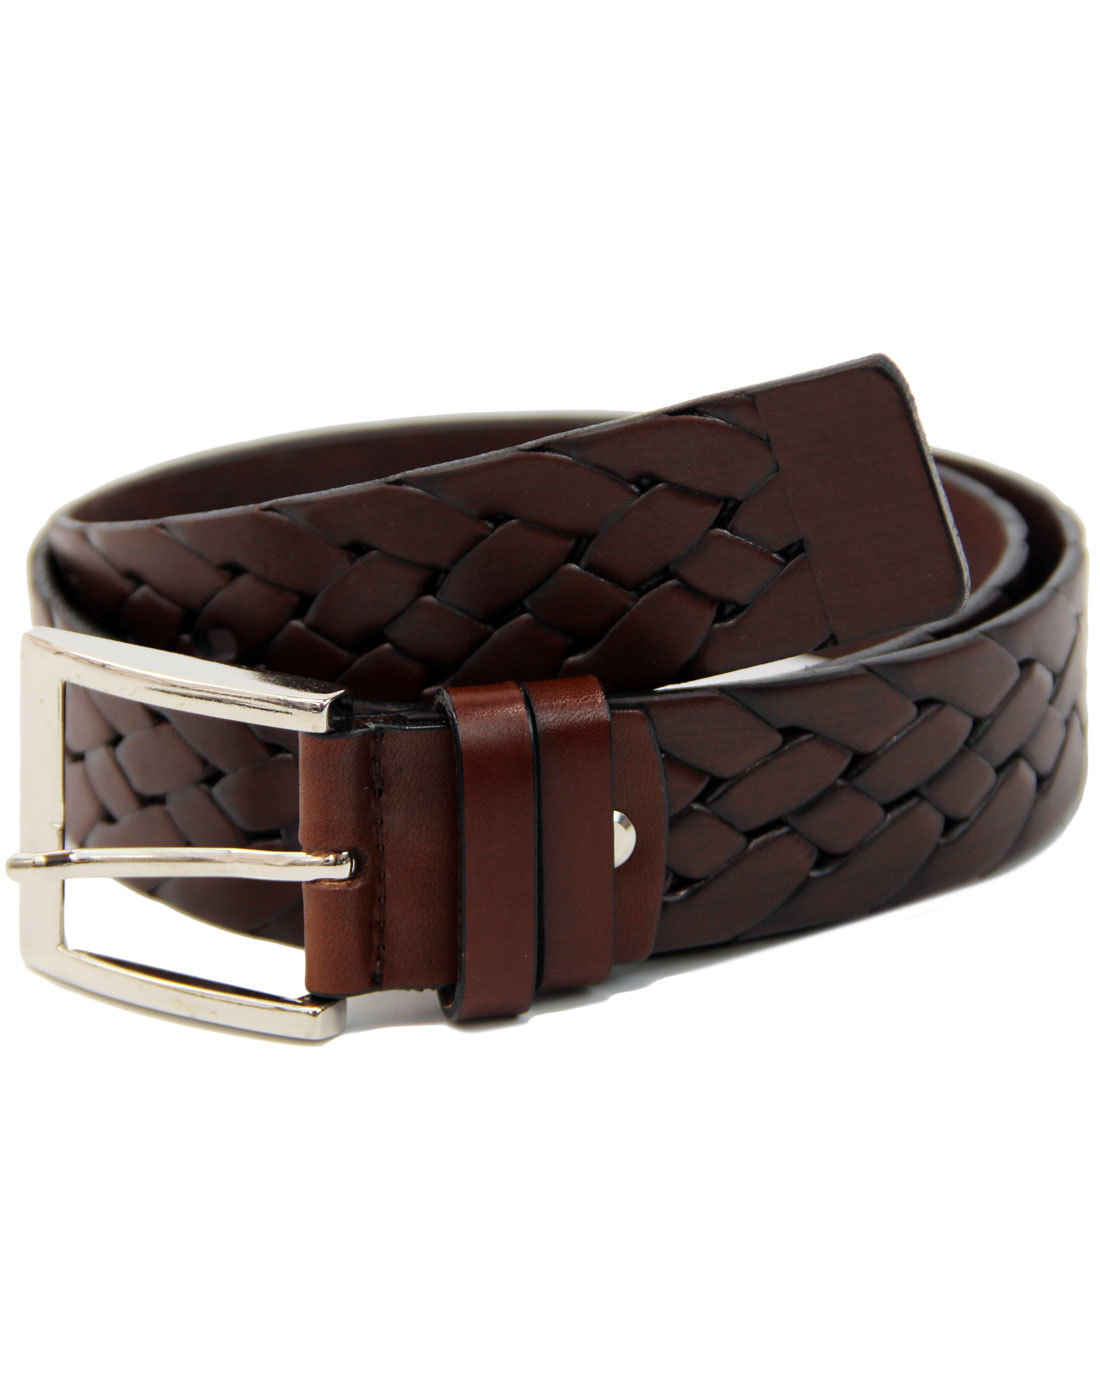 LACUZZO Retro Mod Woven Stamp Leather Belt BROWN